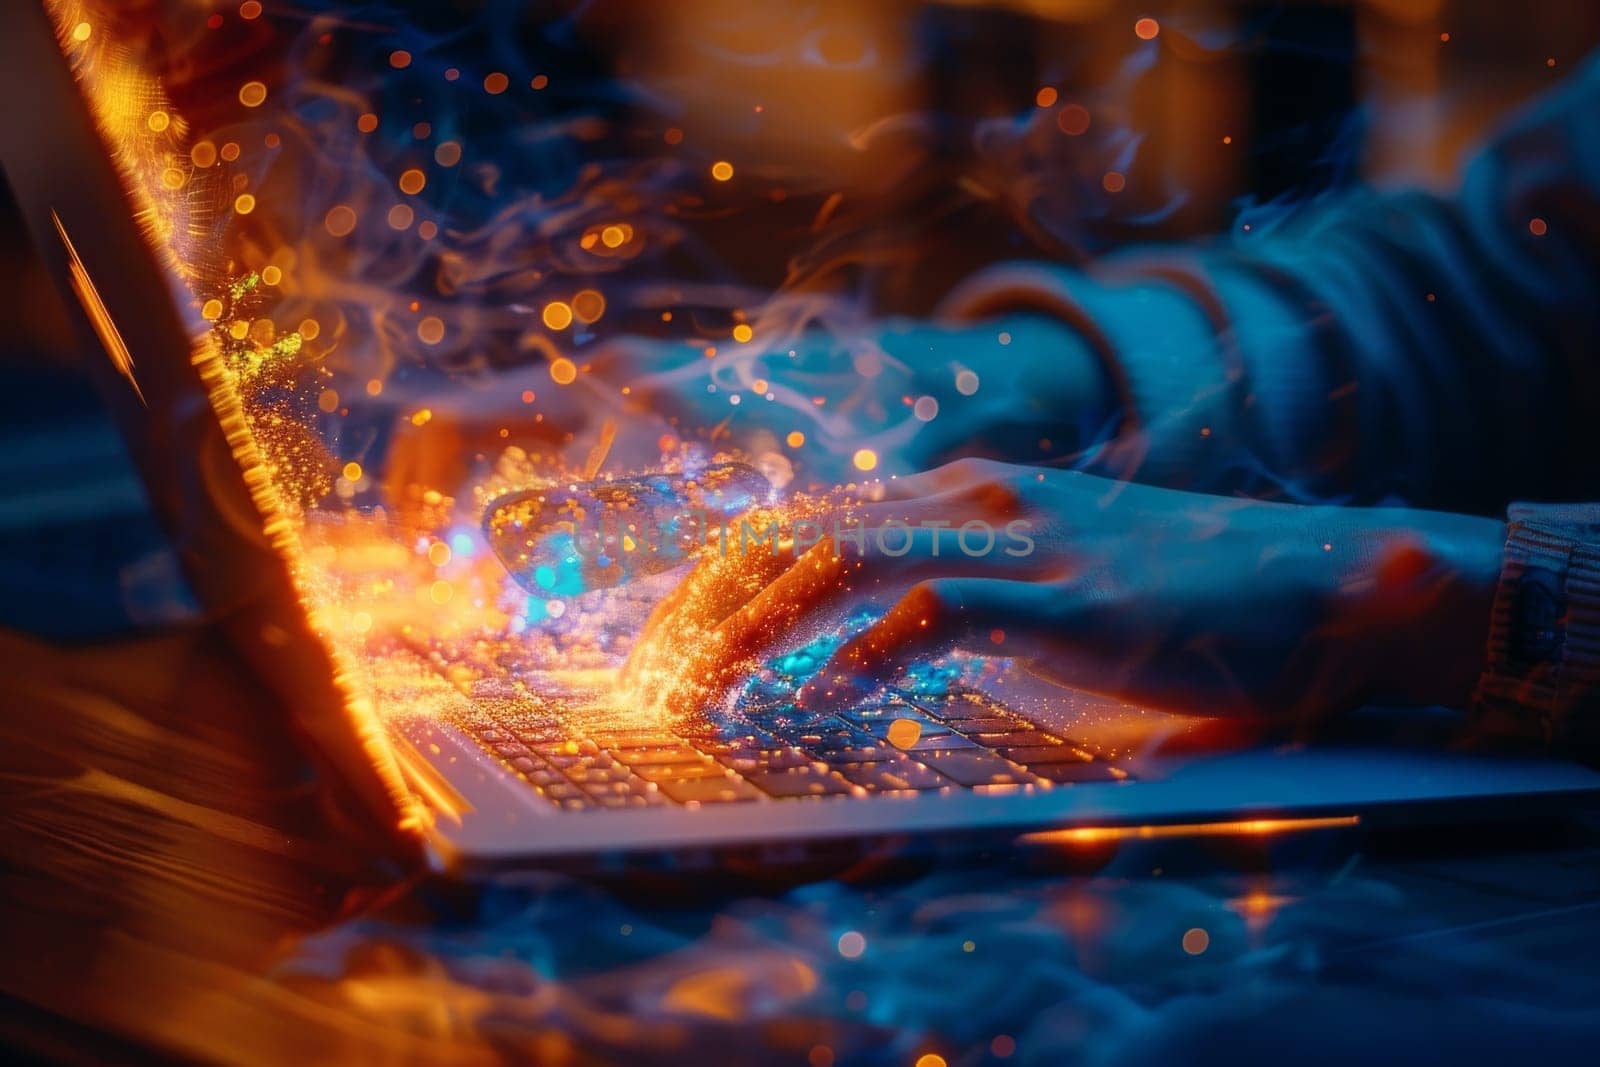 A person is typing on a laptop with a blue and orange background. Concept of creativity and innovation, as the person is using technology to create something new